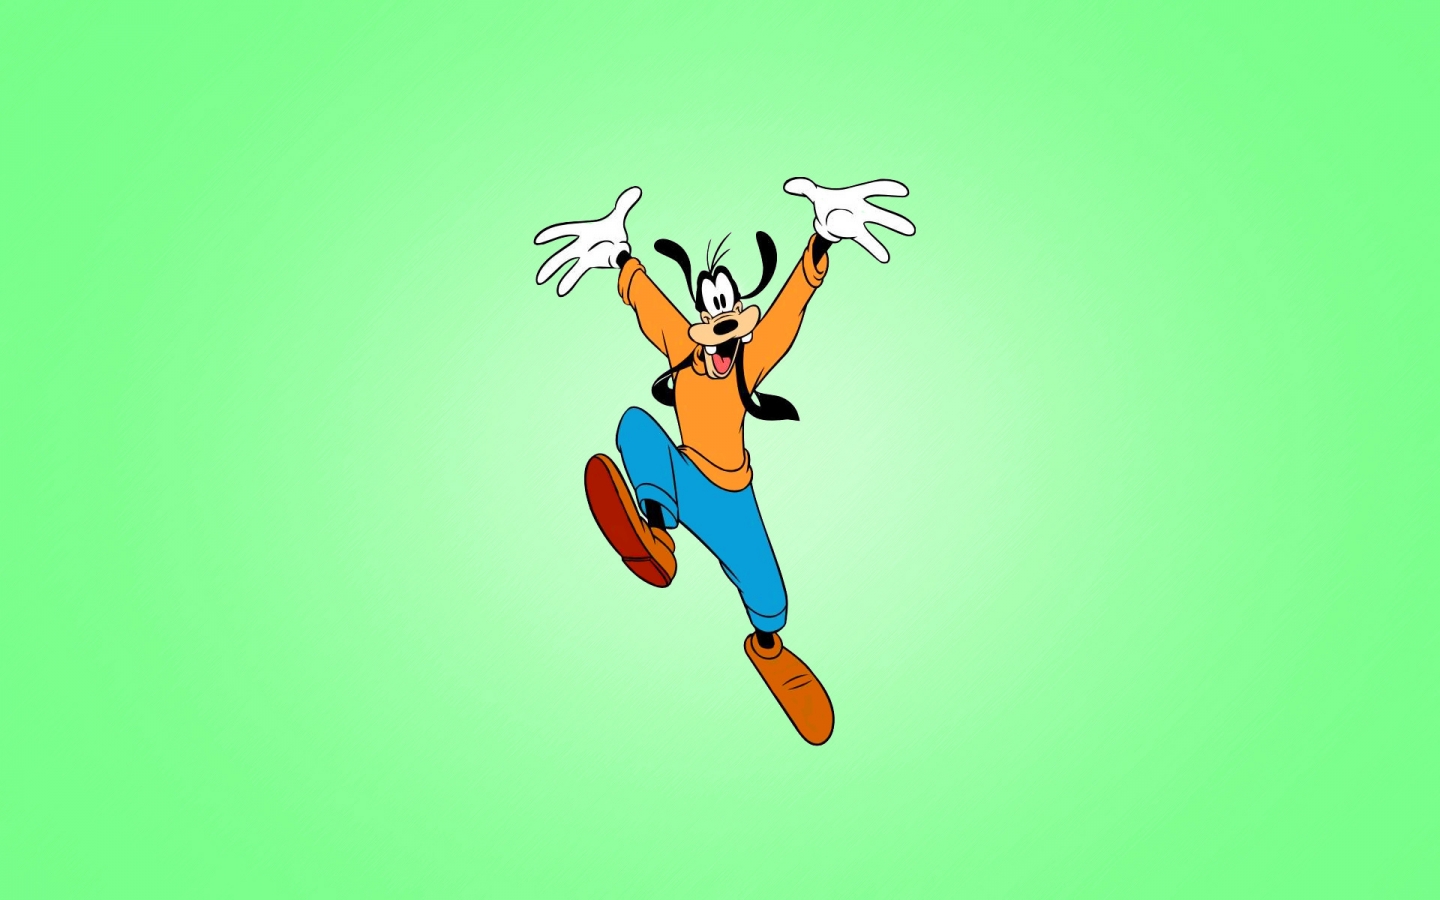 Goofy Character for 1440 x 900 widescreen resolution